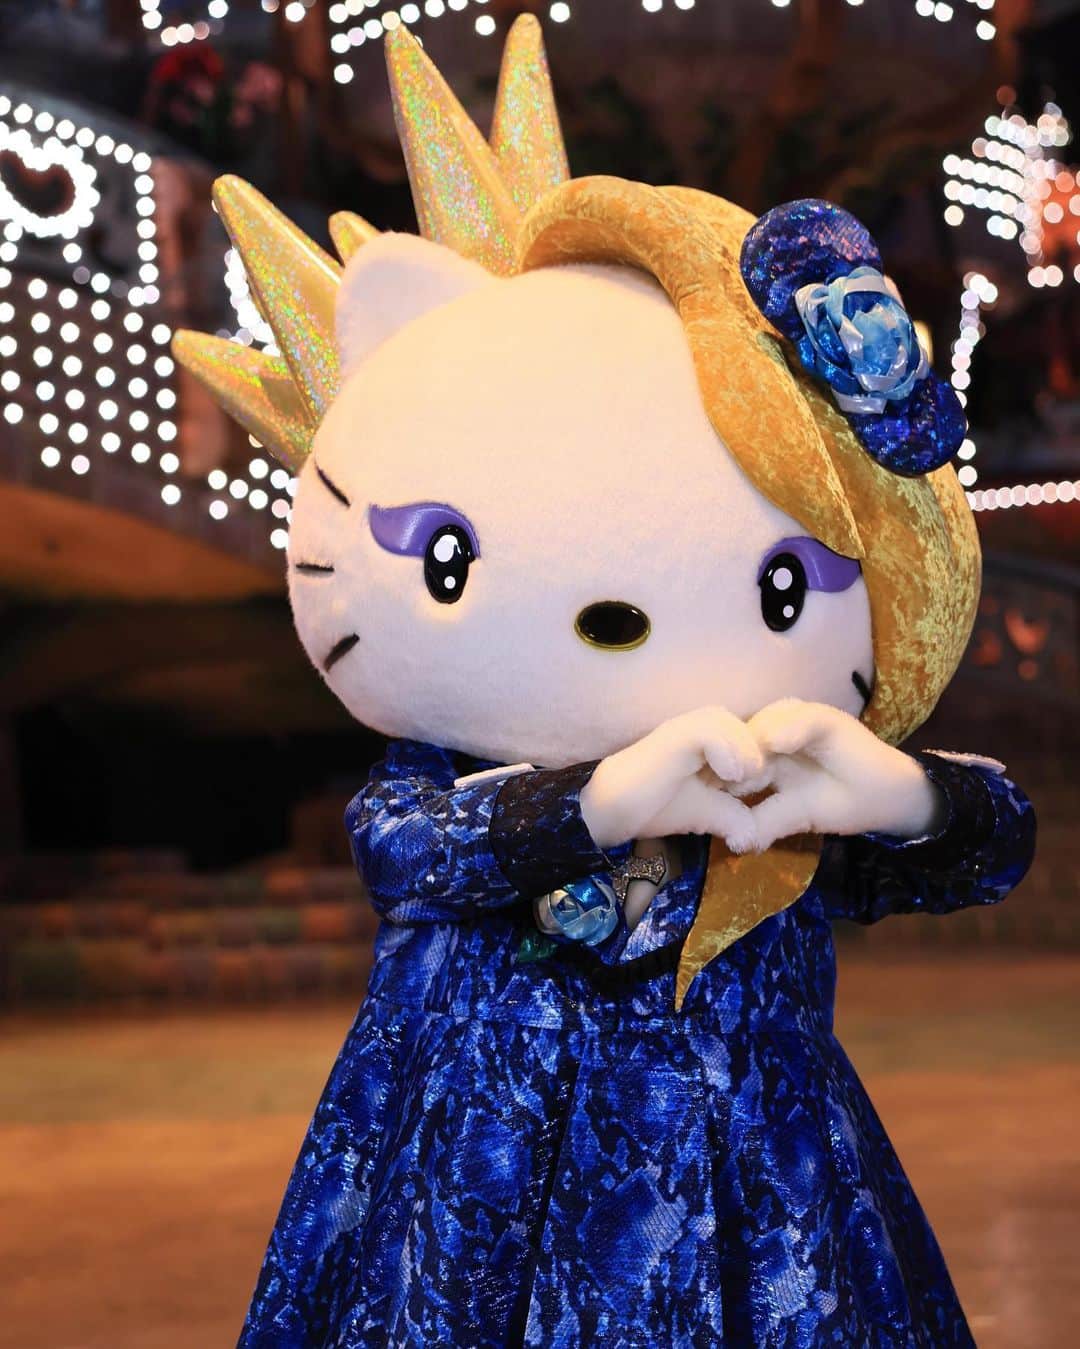 Yoshikittyのインスタグラム：「Please support #yoshikitty in the 2023 #SanrioCharacterRanking! VOTE EVERY DAY from all your devices until May 26!  Link in bio: https://ranking.sanrio.co.jp/en/characters/yoshikitty/  #HelloKitty x #YOSHIKI #teamyoshikitty #チームyoshikitty #Sanrio  @yoshikiofficial」